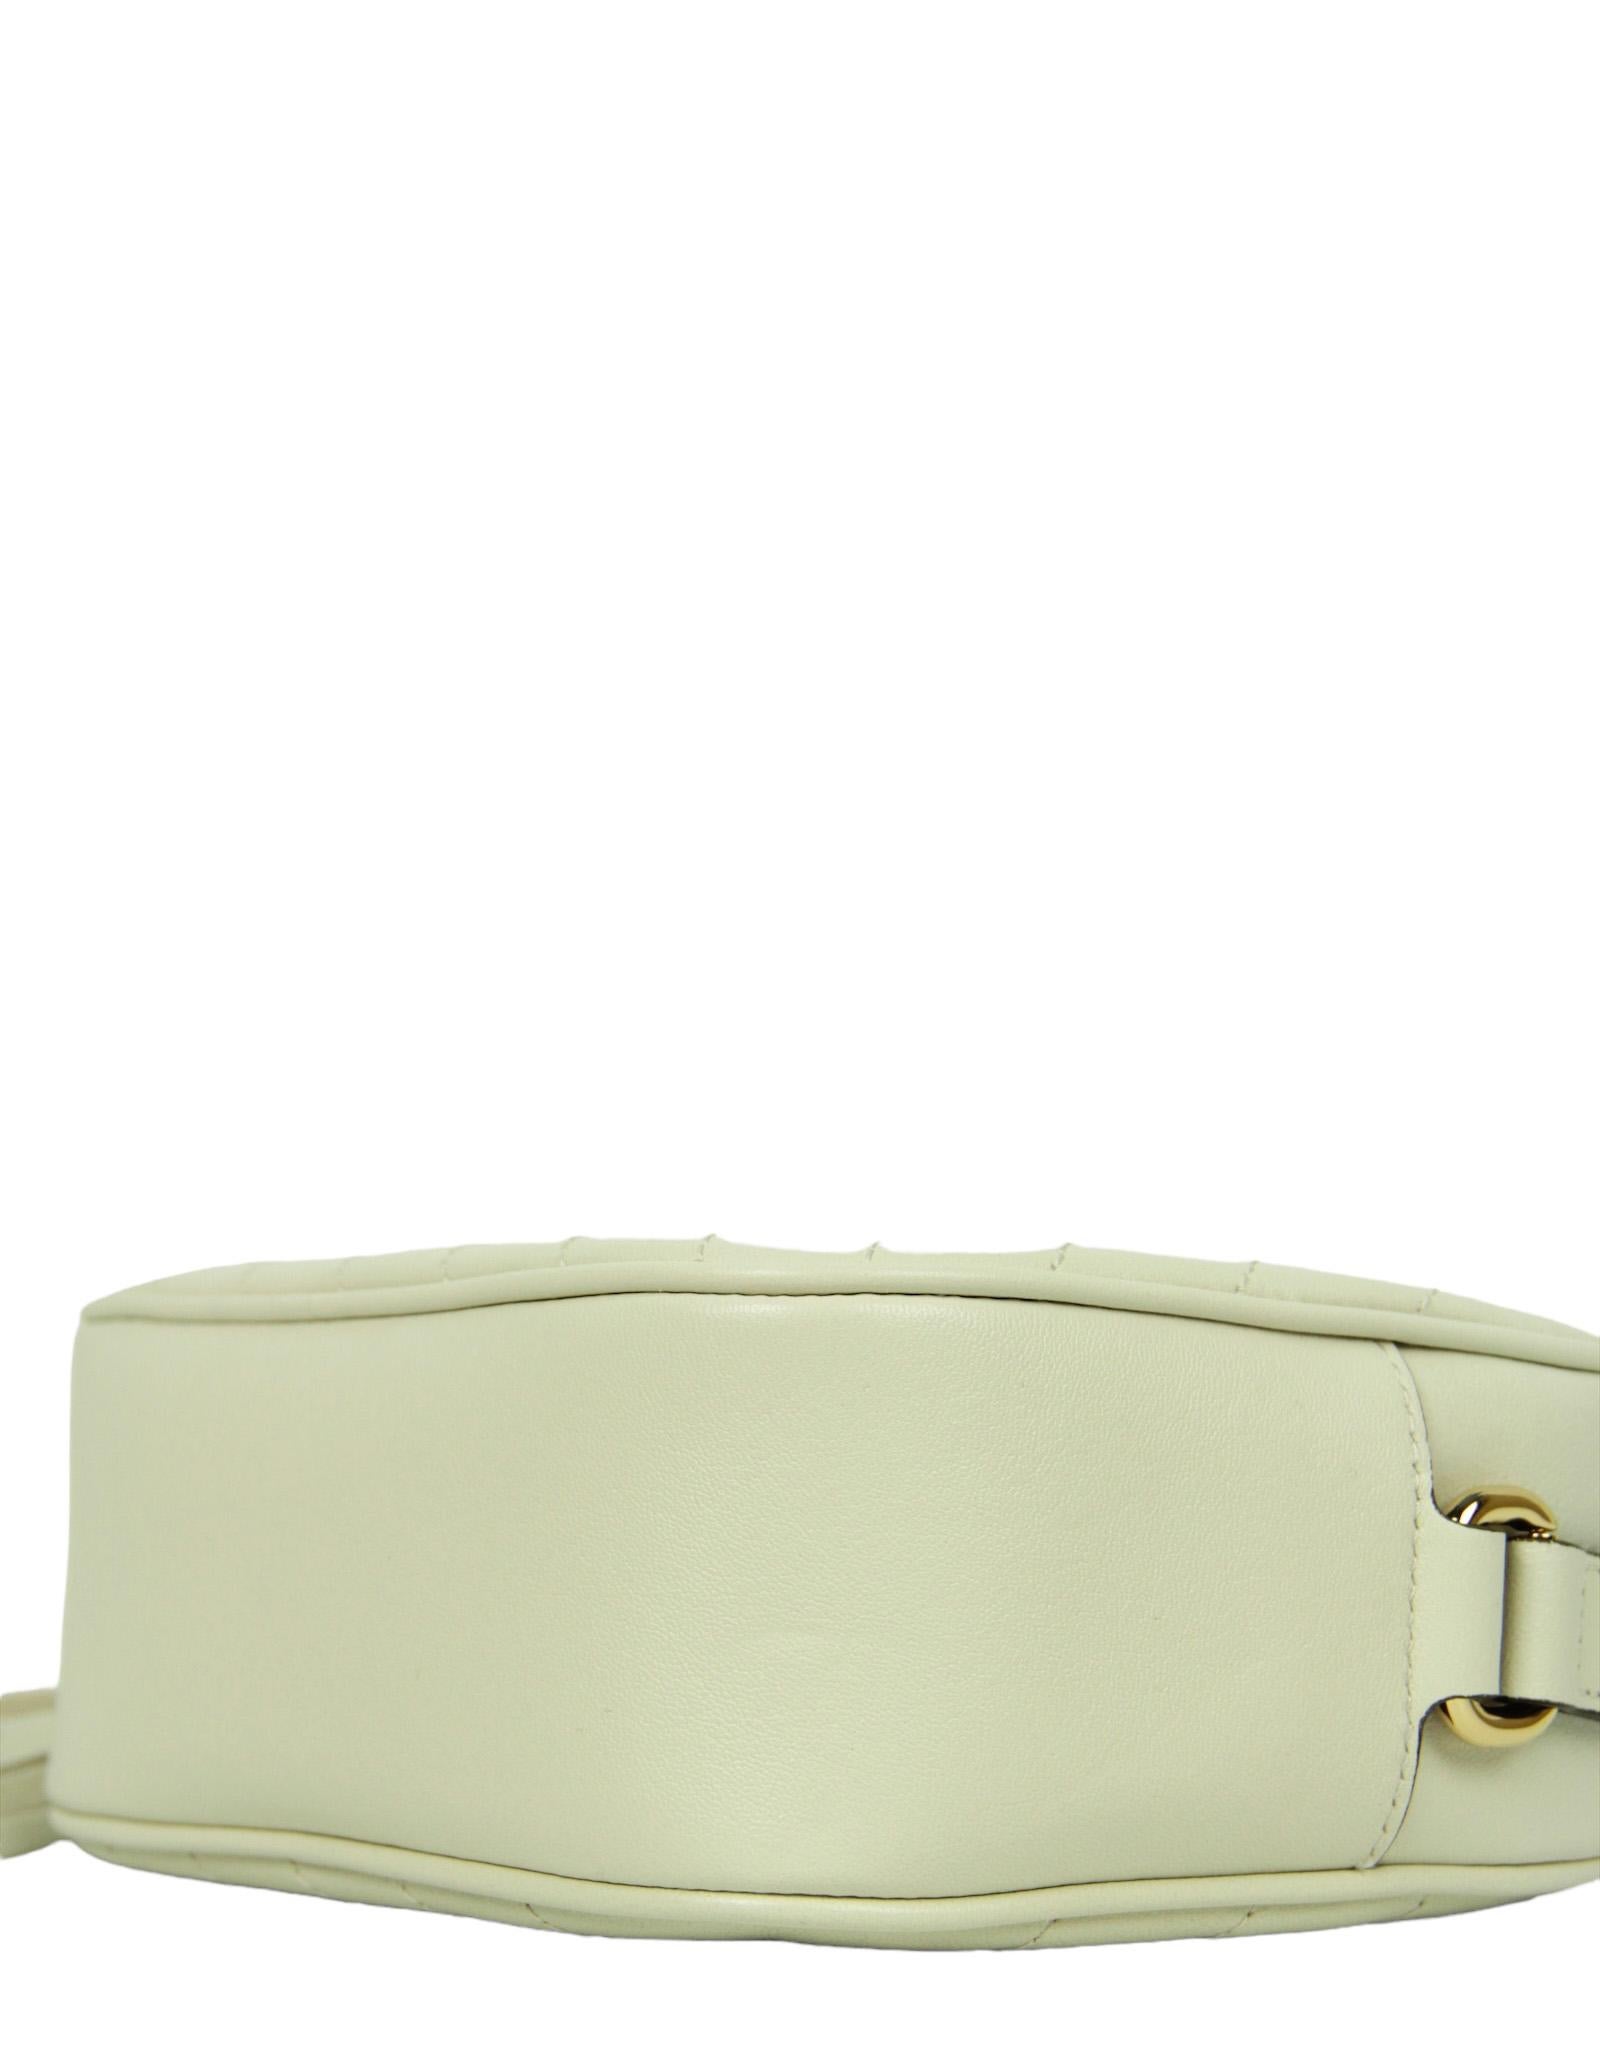 Gucci White Leather Small GG Logo Blondie Crossbody Bag For Sale 1